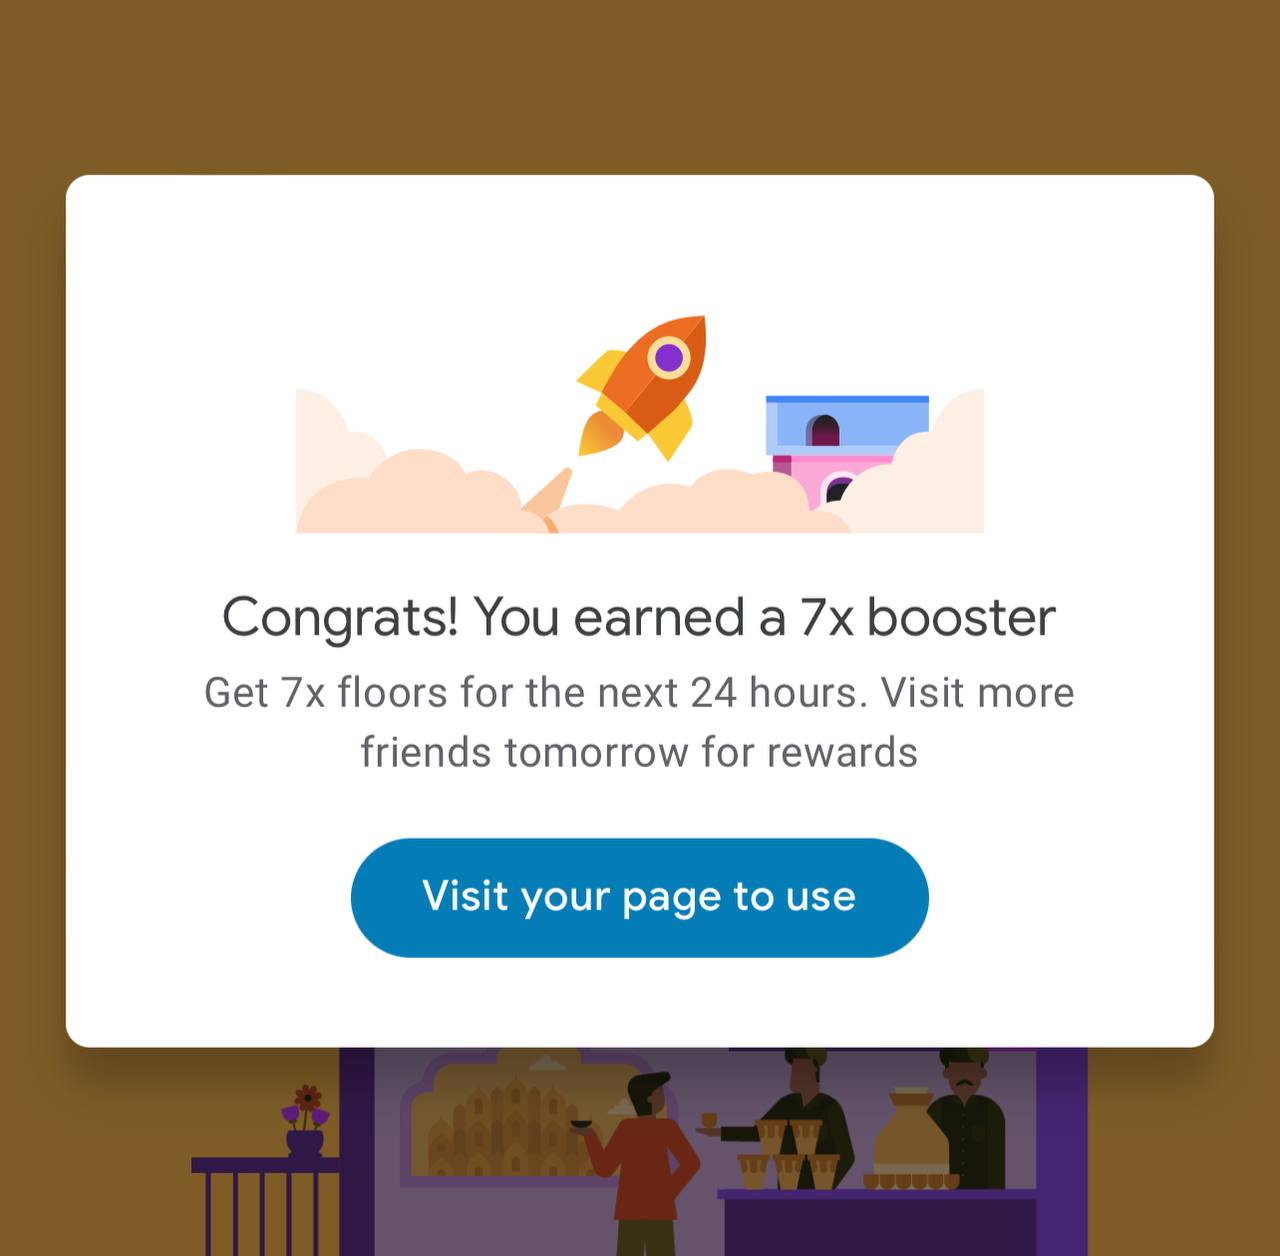 How to Claim 9X Booster in Google Pay Food Market Offer